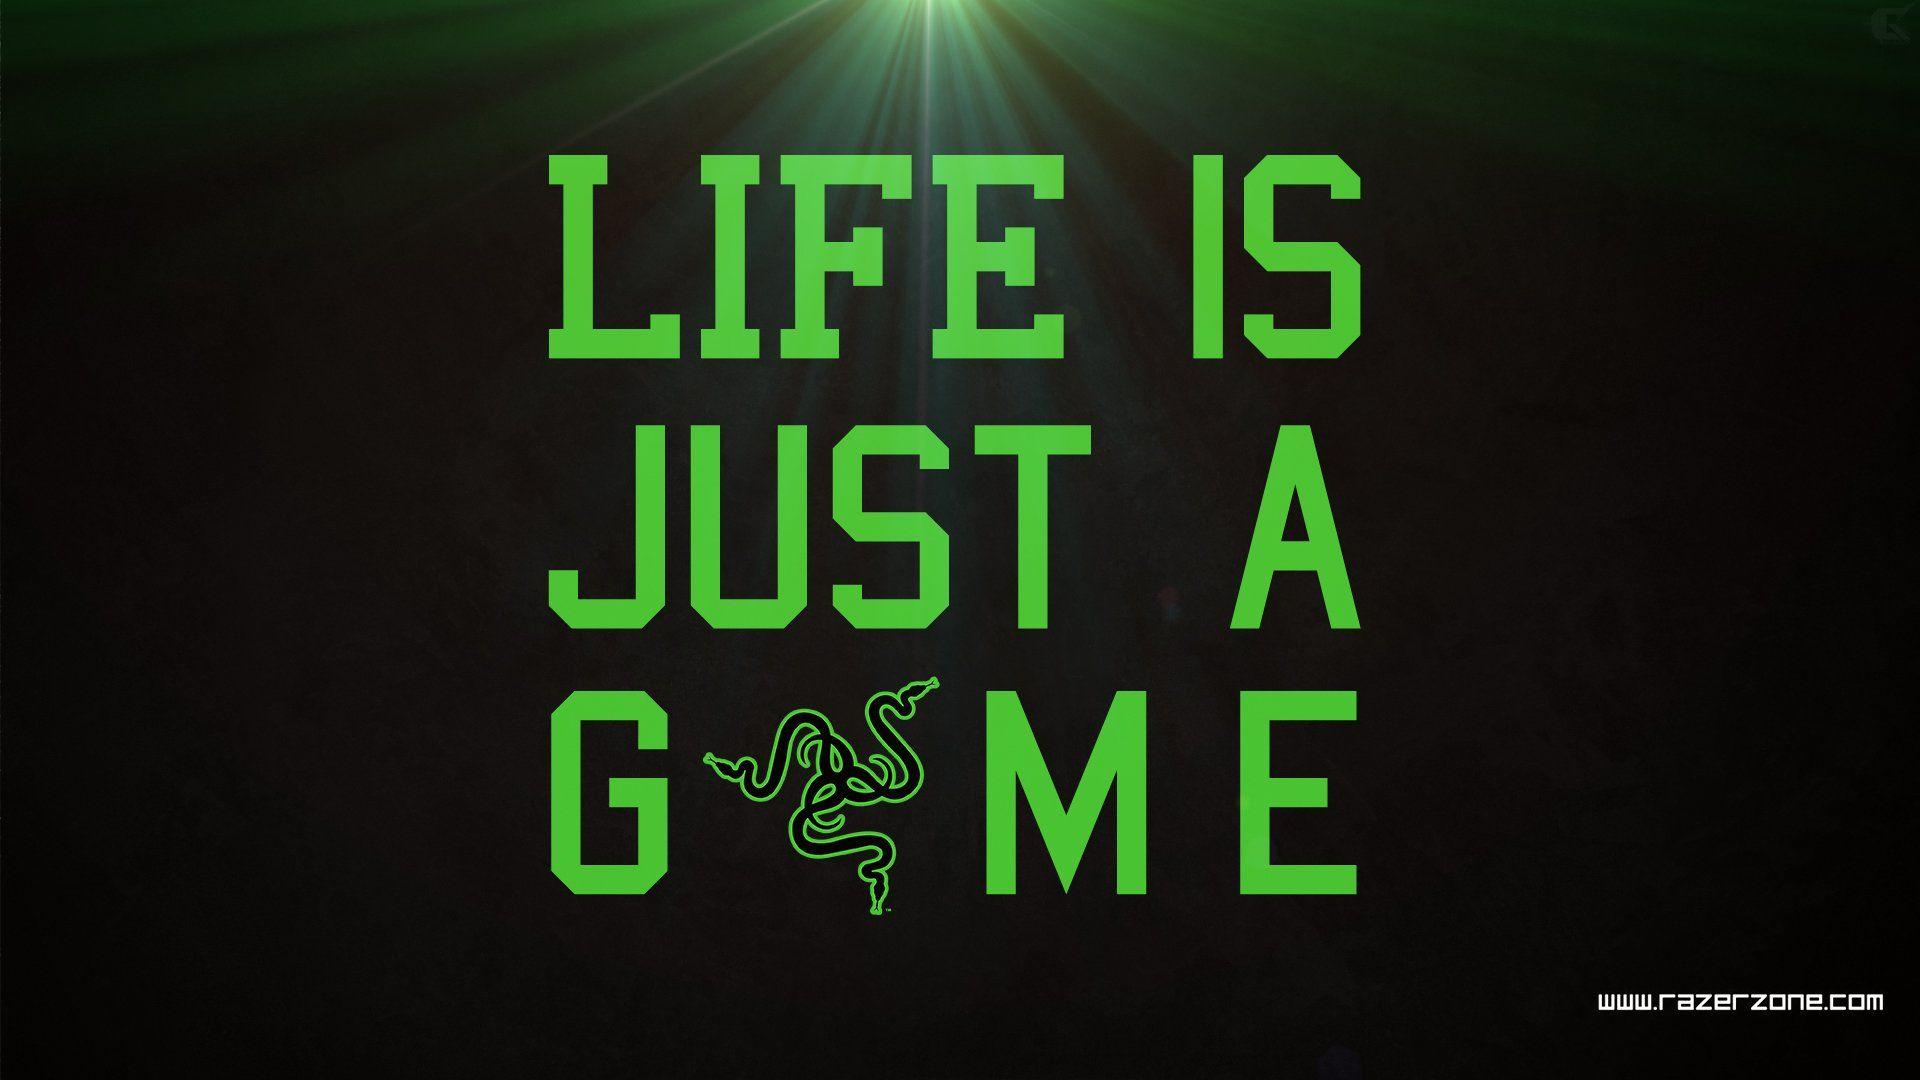 Is it just a game. Razer. Заставка Razer. Обои на ПК Razer. HD обои Razer.